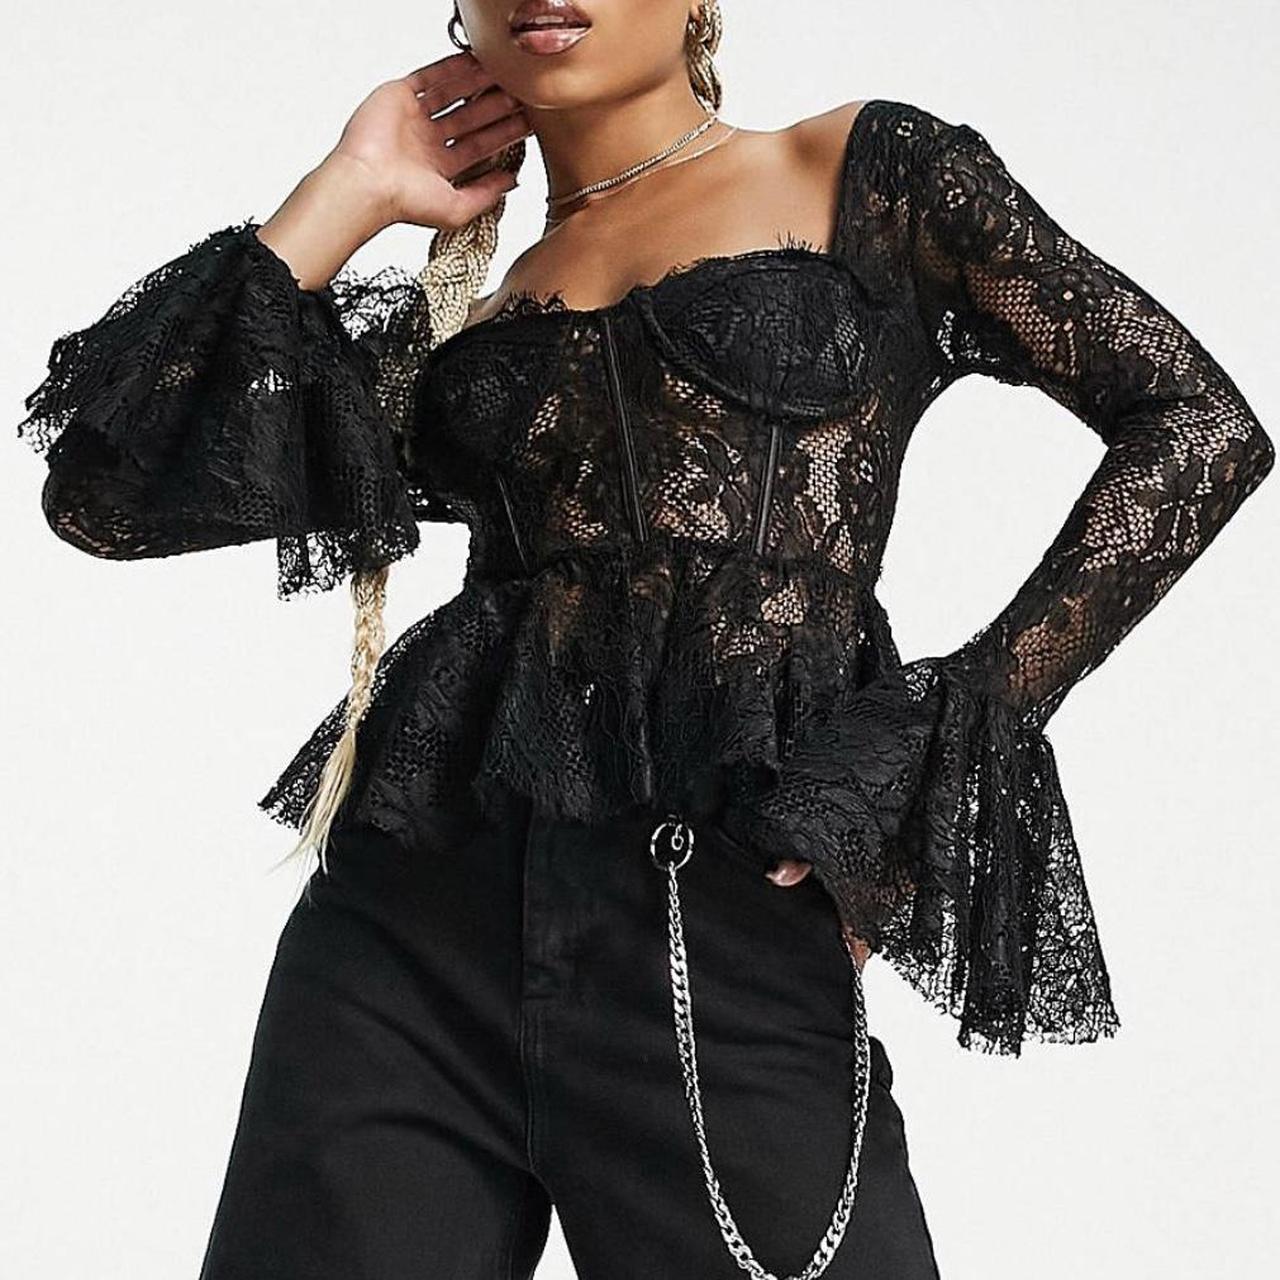 Reclaimed Vintage long sleeve lace corset top